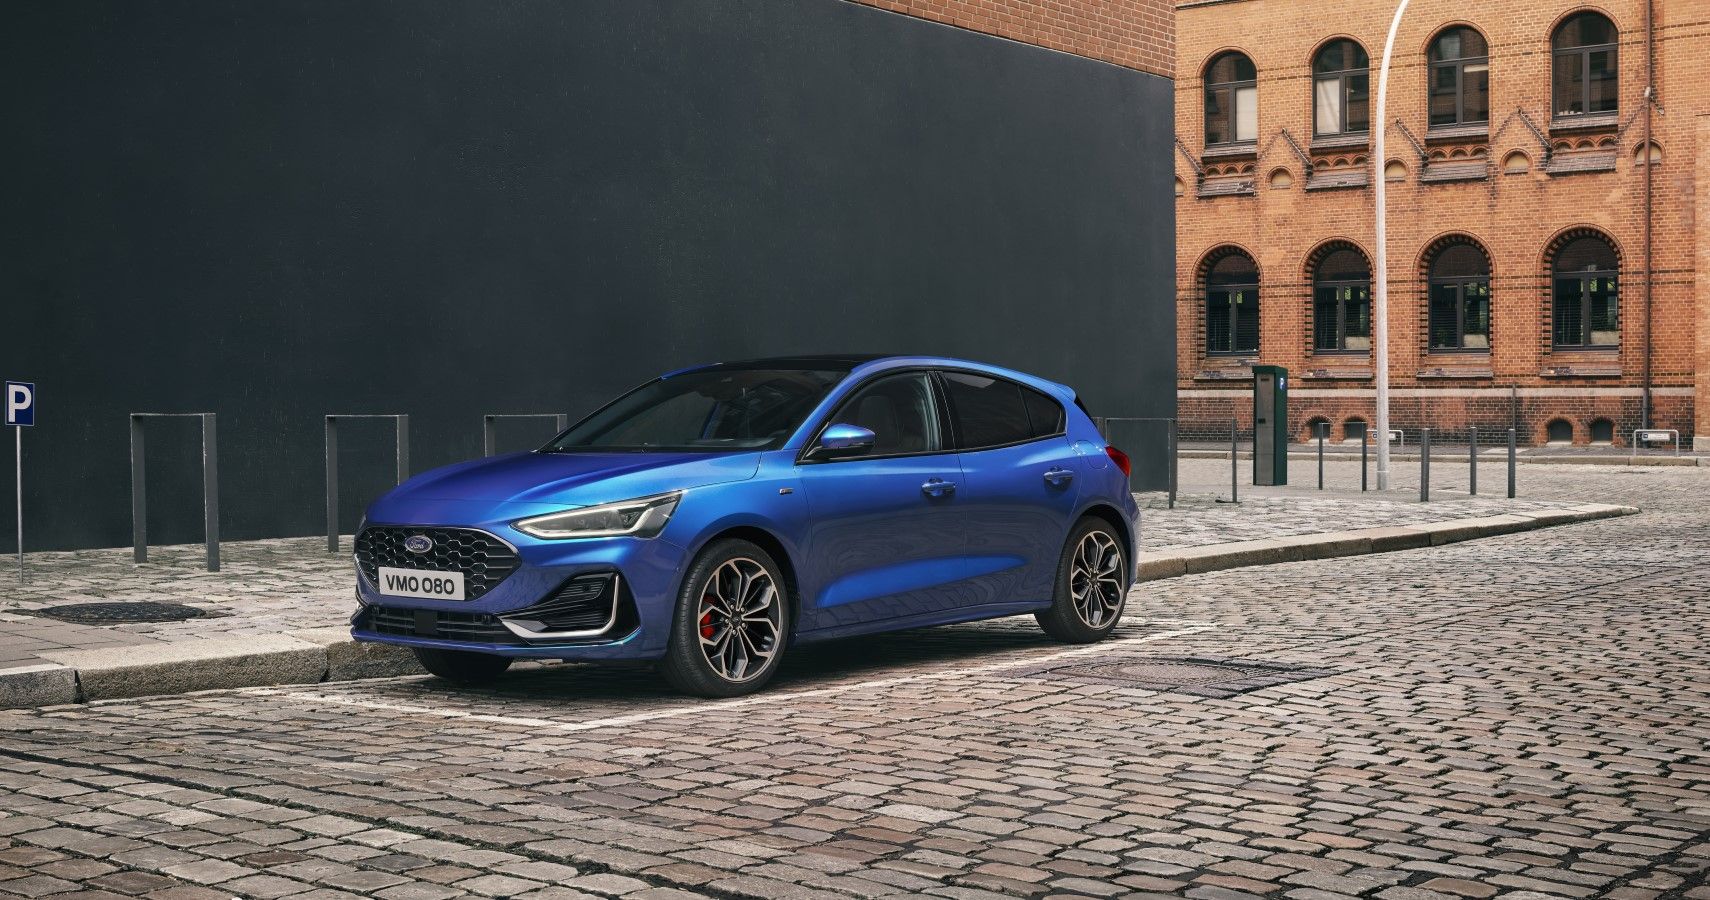 2022 Ford Focus Facelift front third quarter view